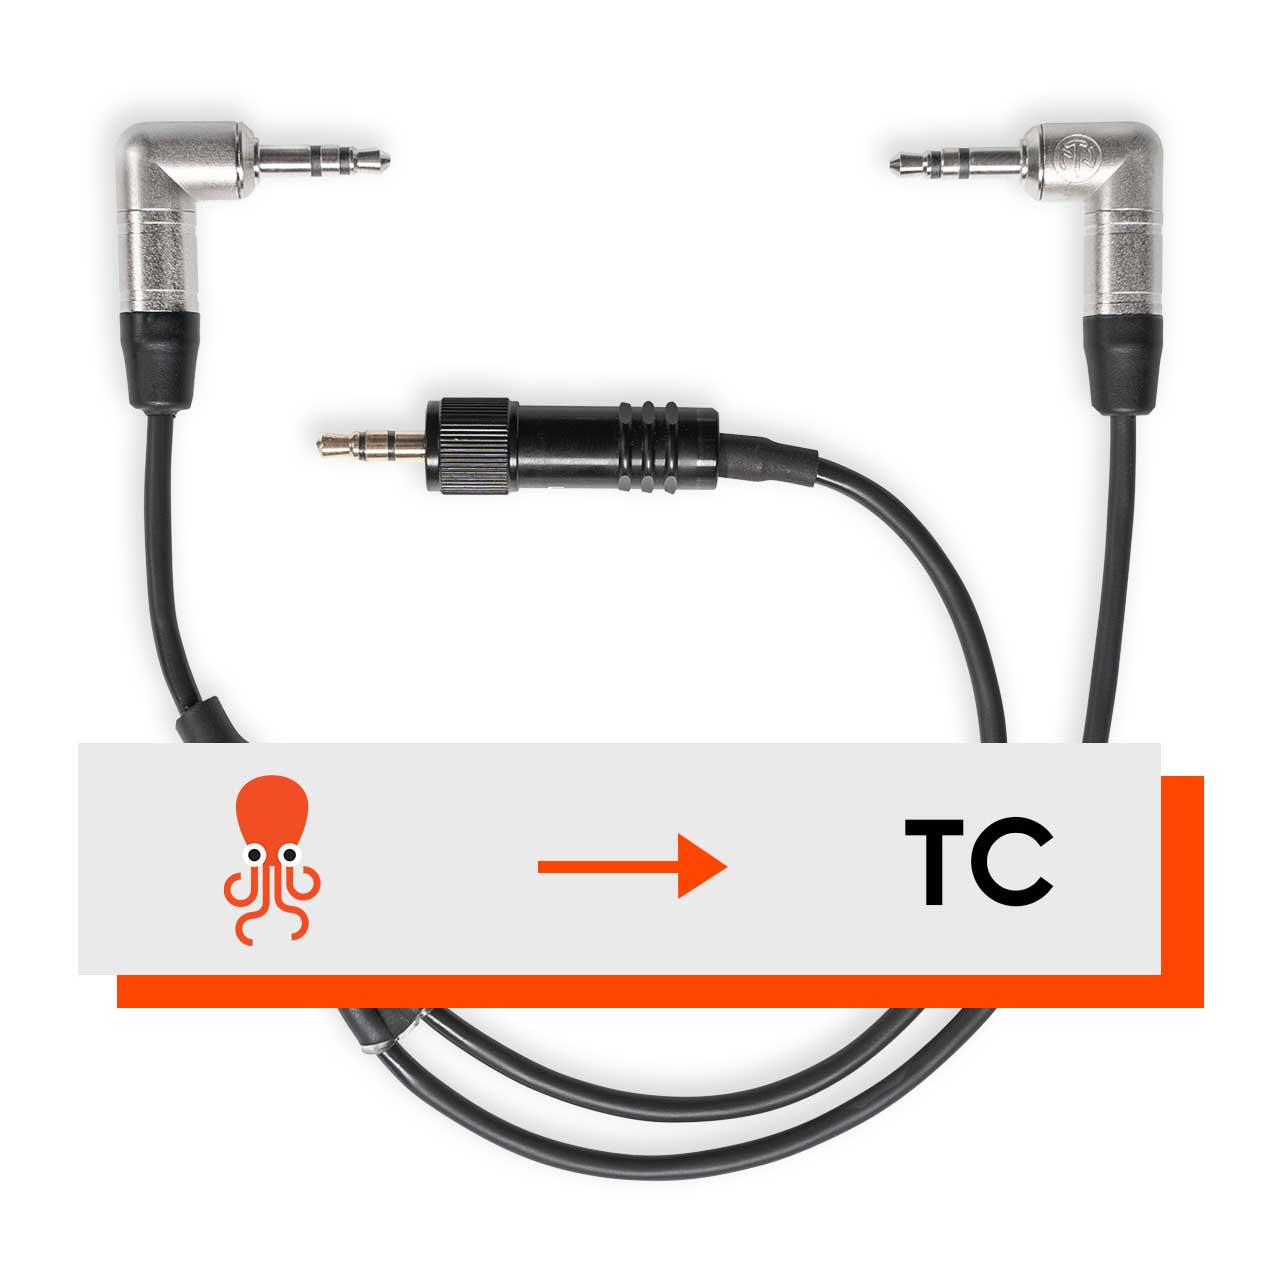 XLR to Tentacle timecode cable